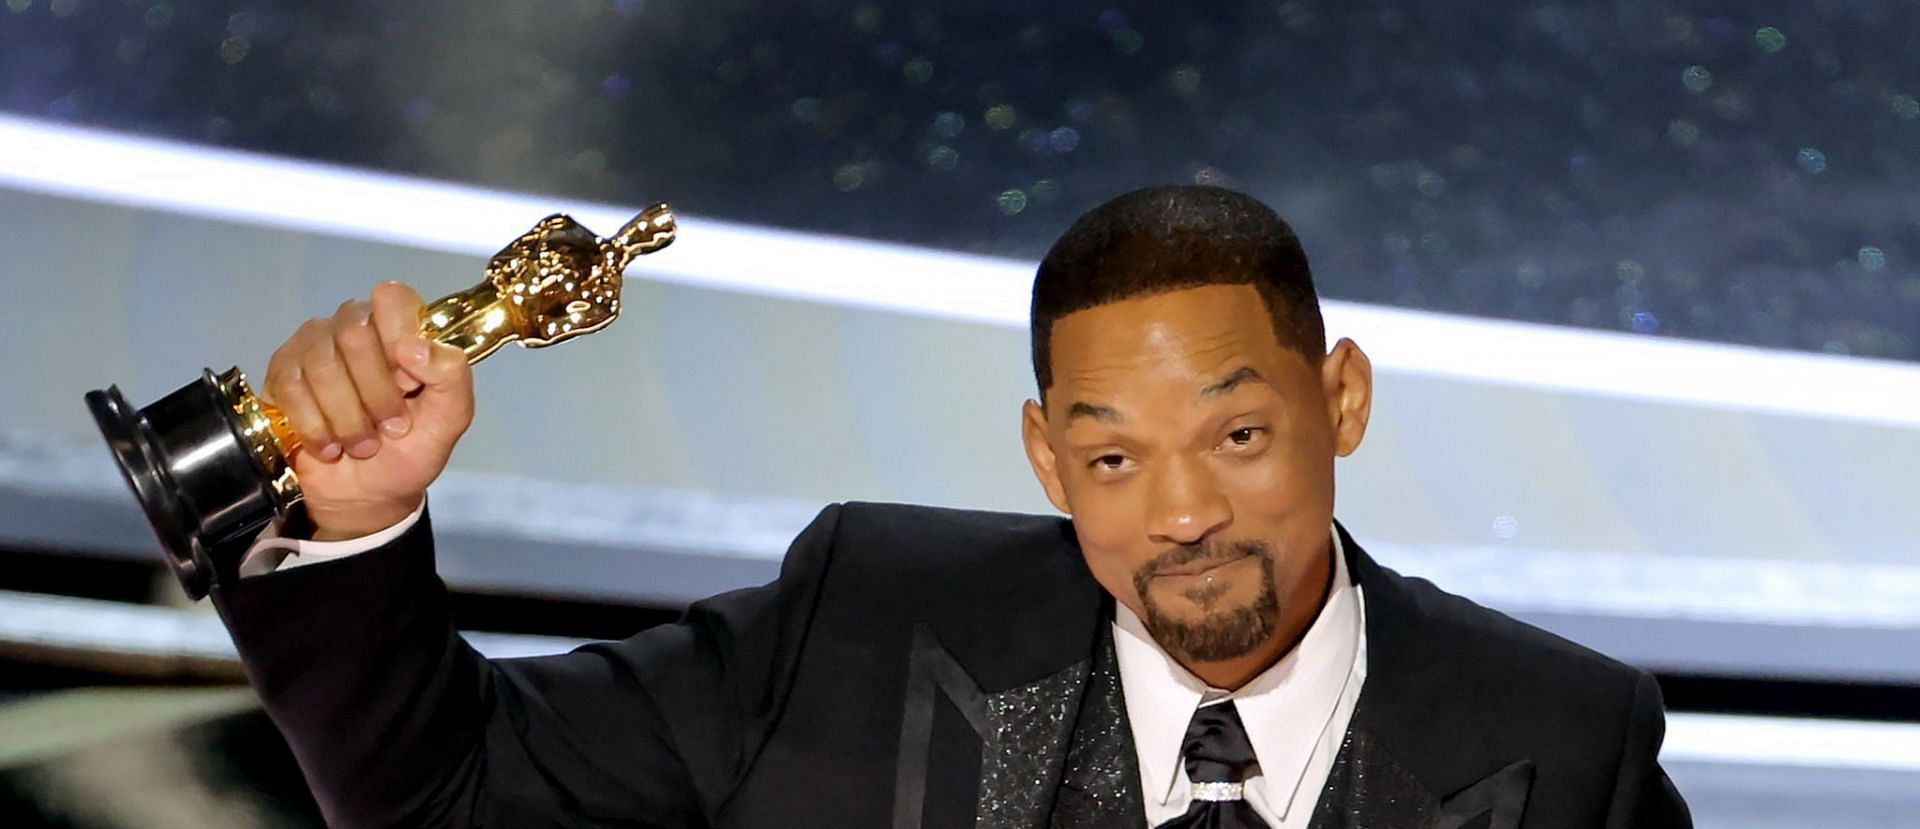 Will Smith issued a public apology for Chris Rock following the Oscars controversy (Image via Getty Images/Neilson Barnard)